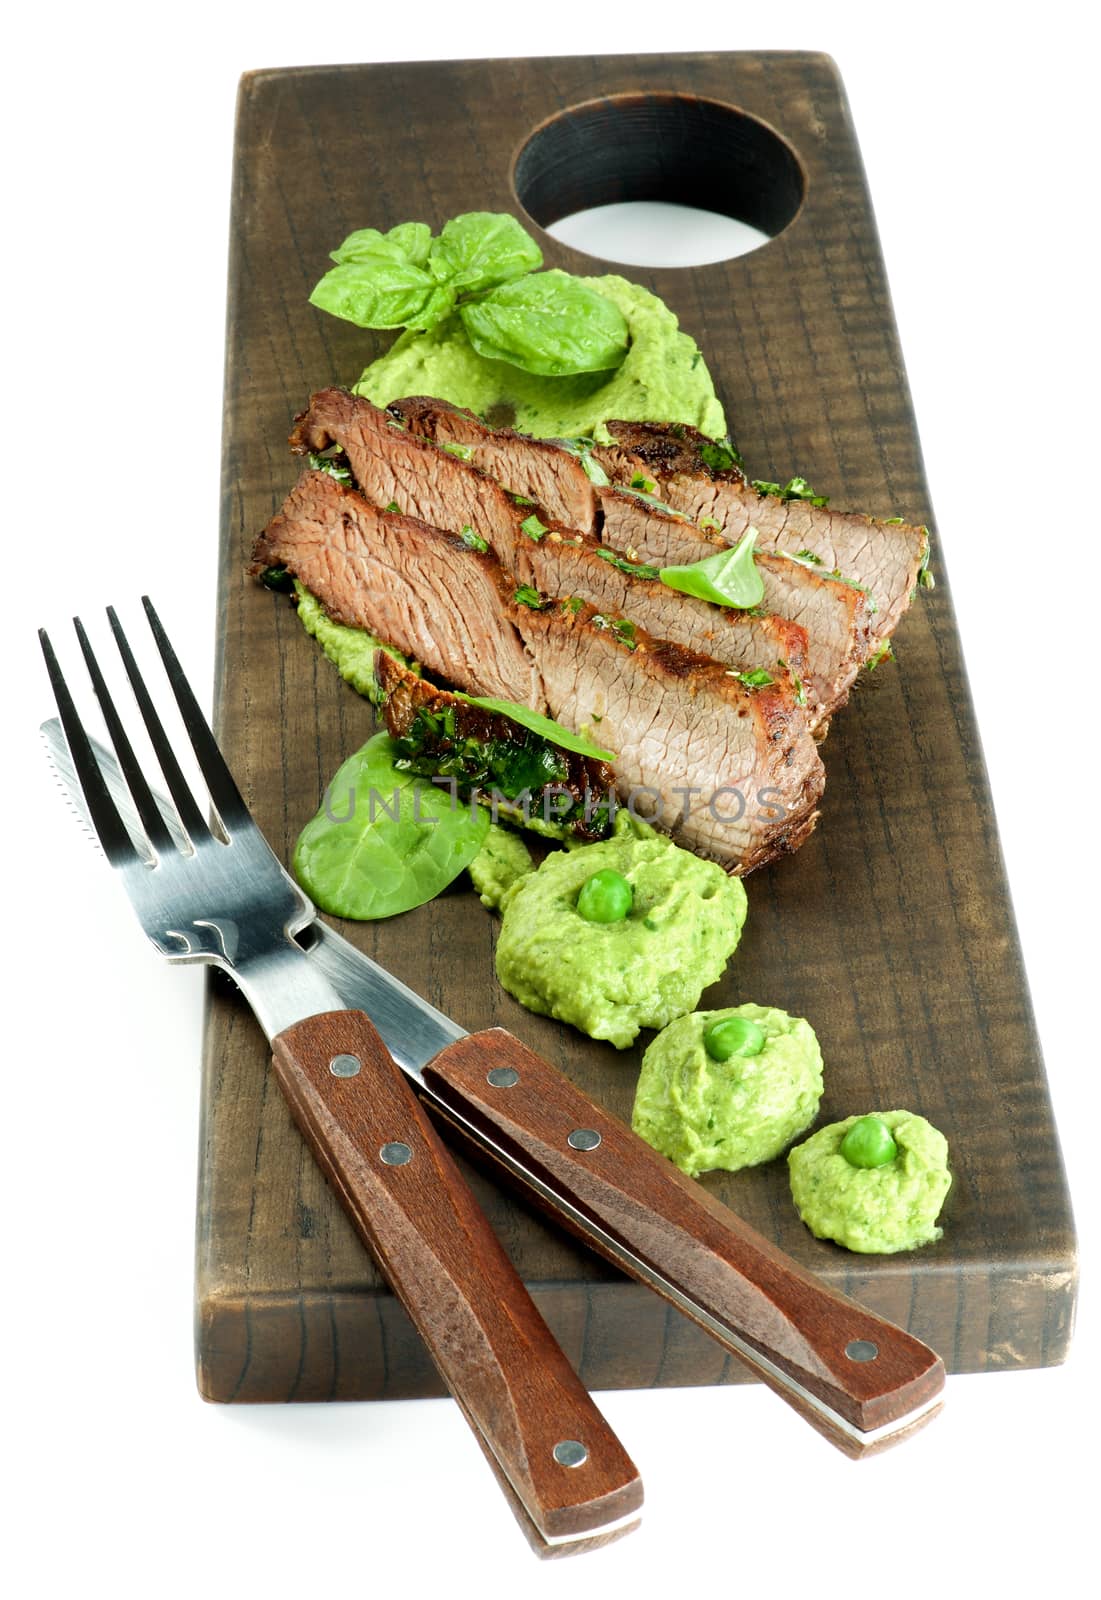 Delicious Roasted in Herbs Pork and Mashed Green Pea Puree with Greens, Fork and Knife on Wooden Serving Board isolated on White background